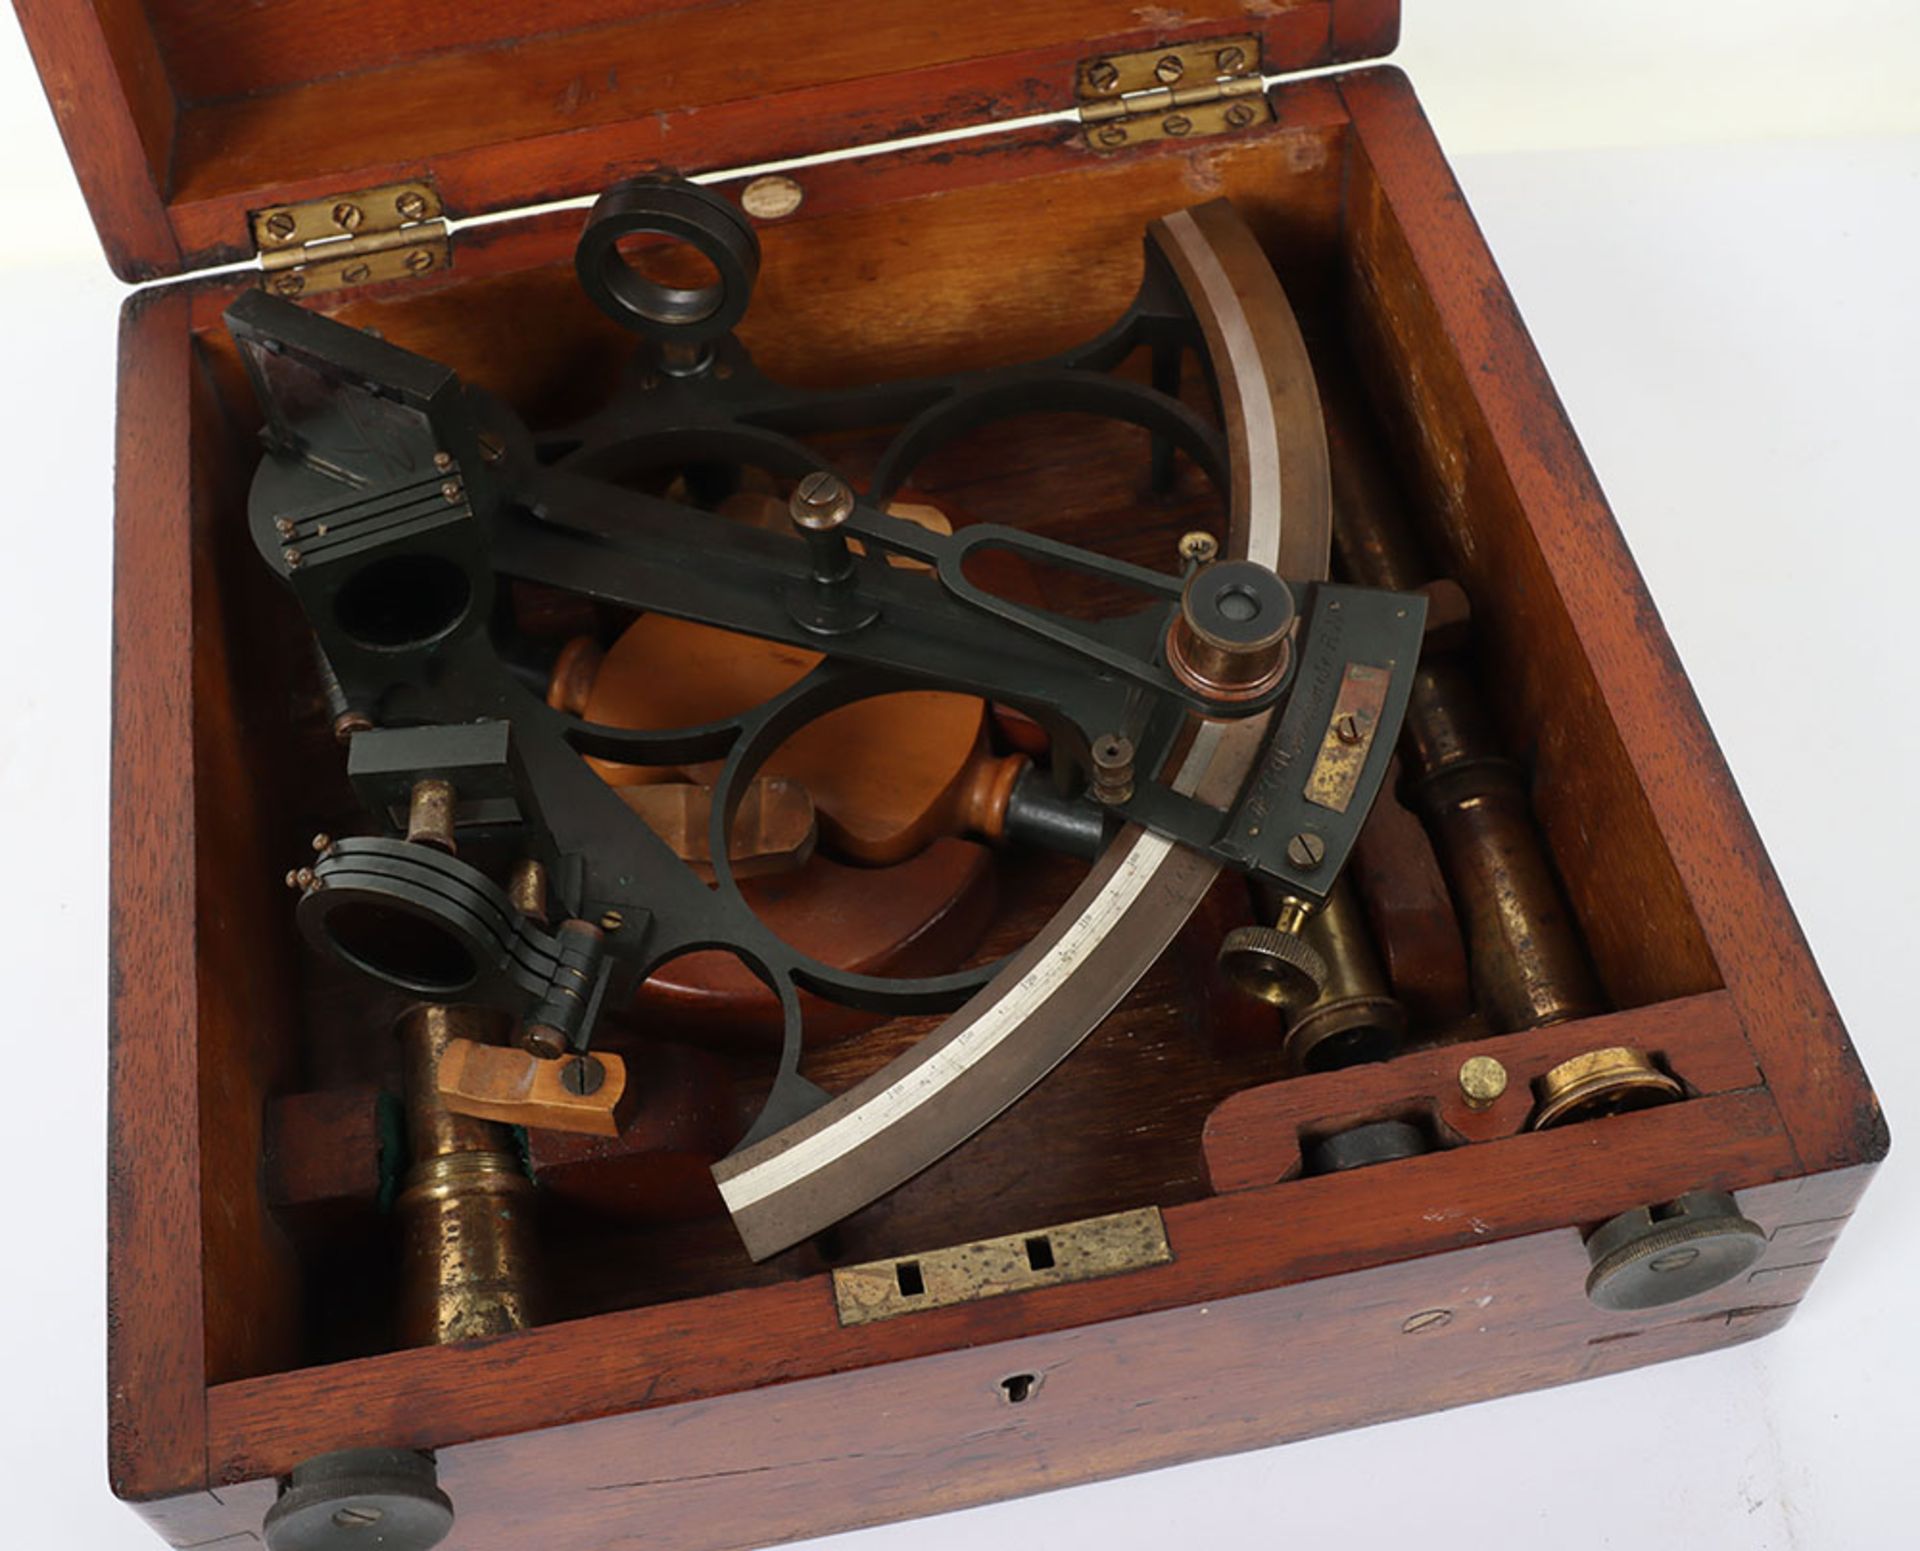 A Royal Navy sextant with Certificate of Examination dated 1899, belonging to Commander Philip G Wod - Image 4 of 7